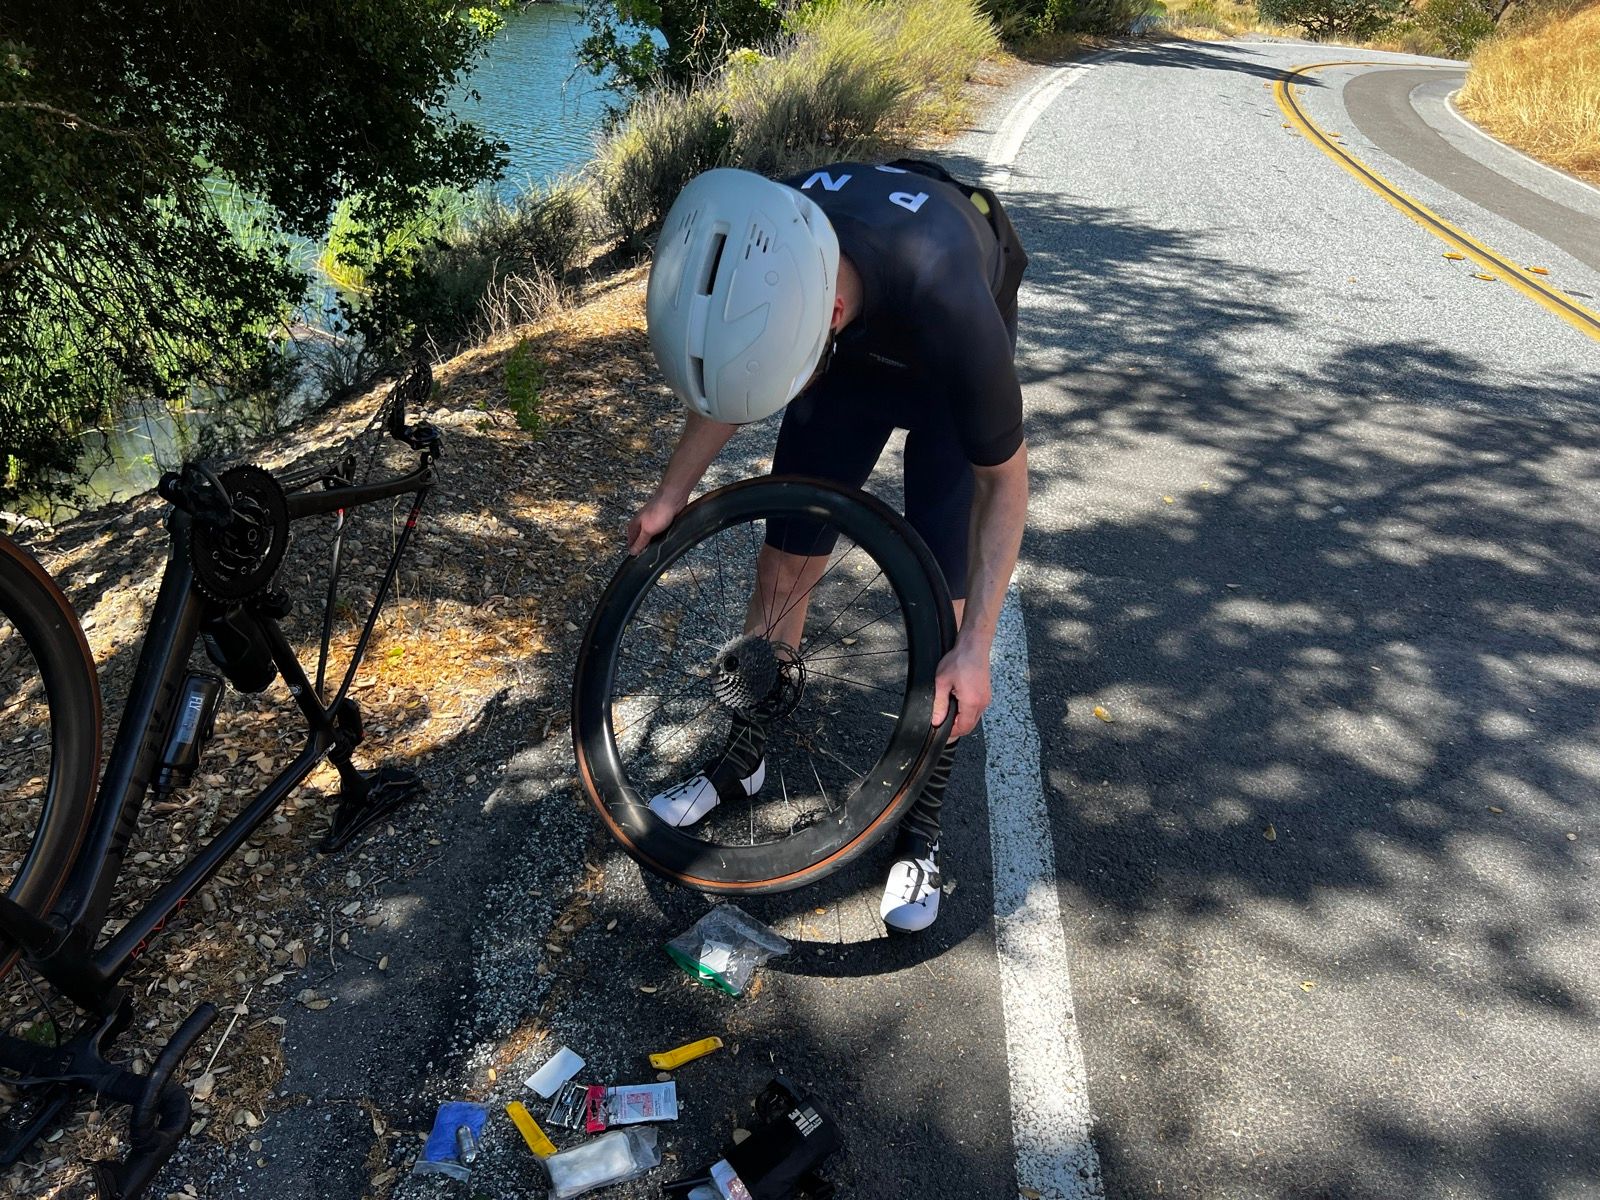 Cyclist changing out an inner tube inside a tubeless bike tire on the side of the road.